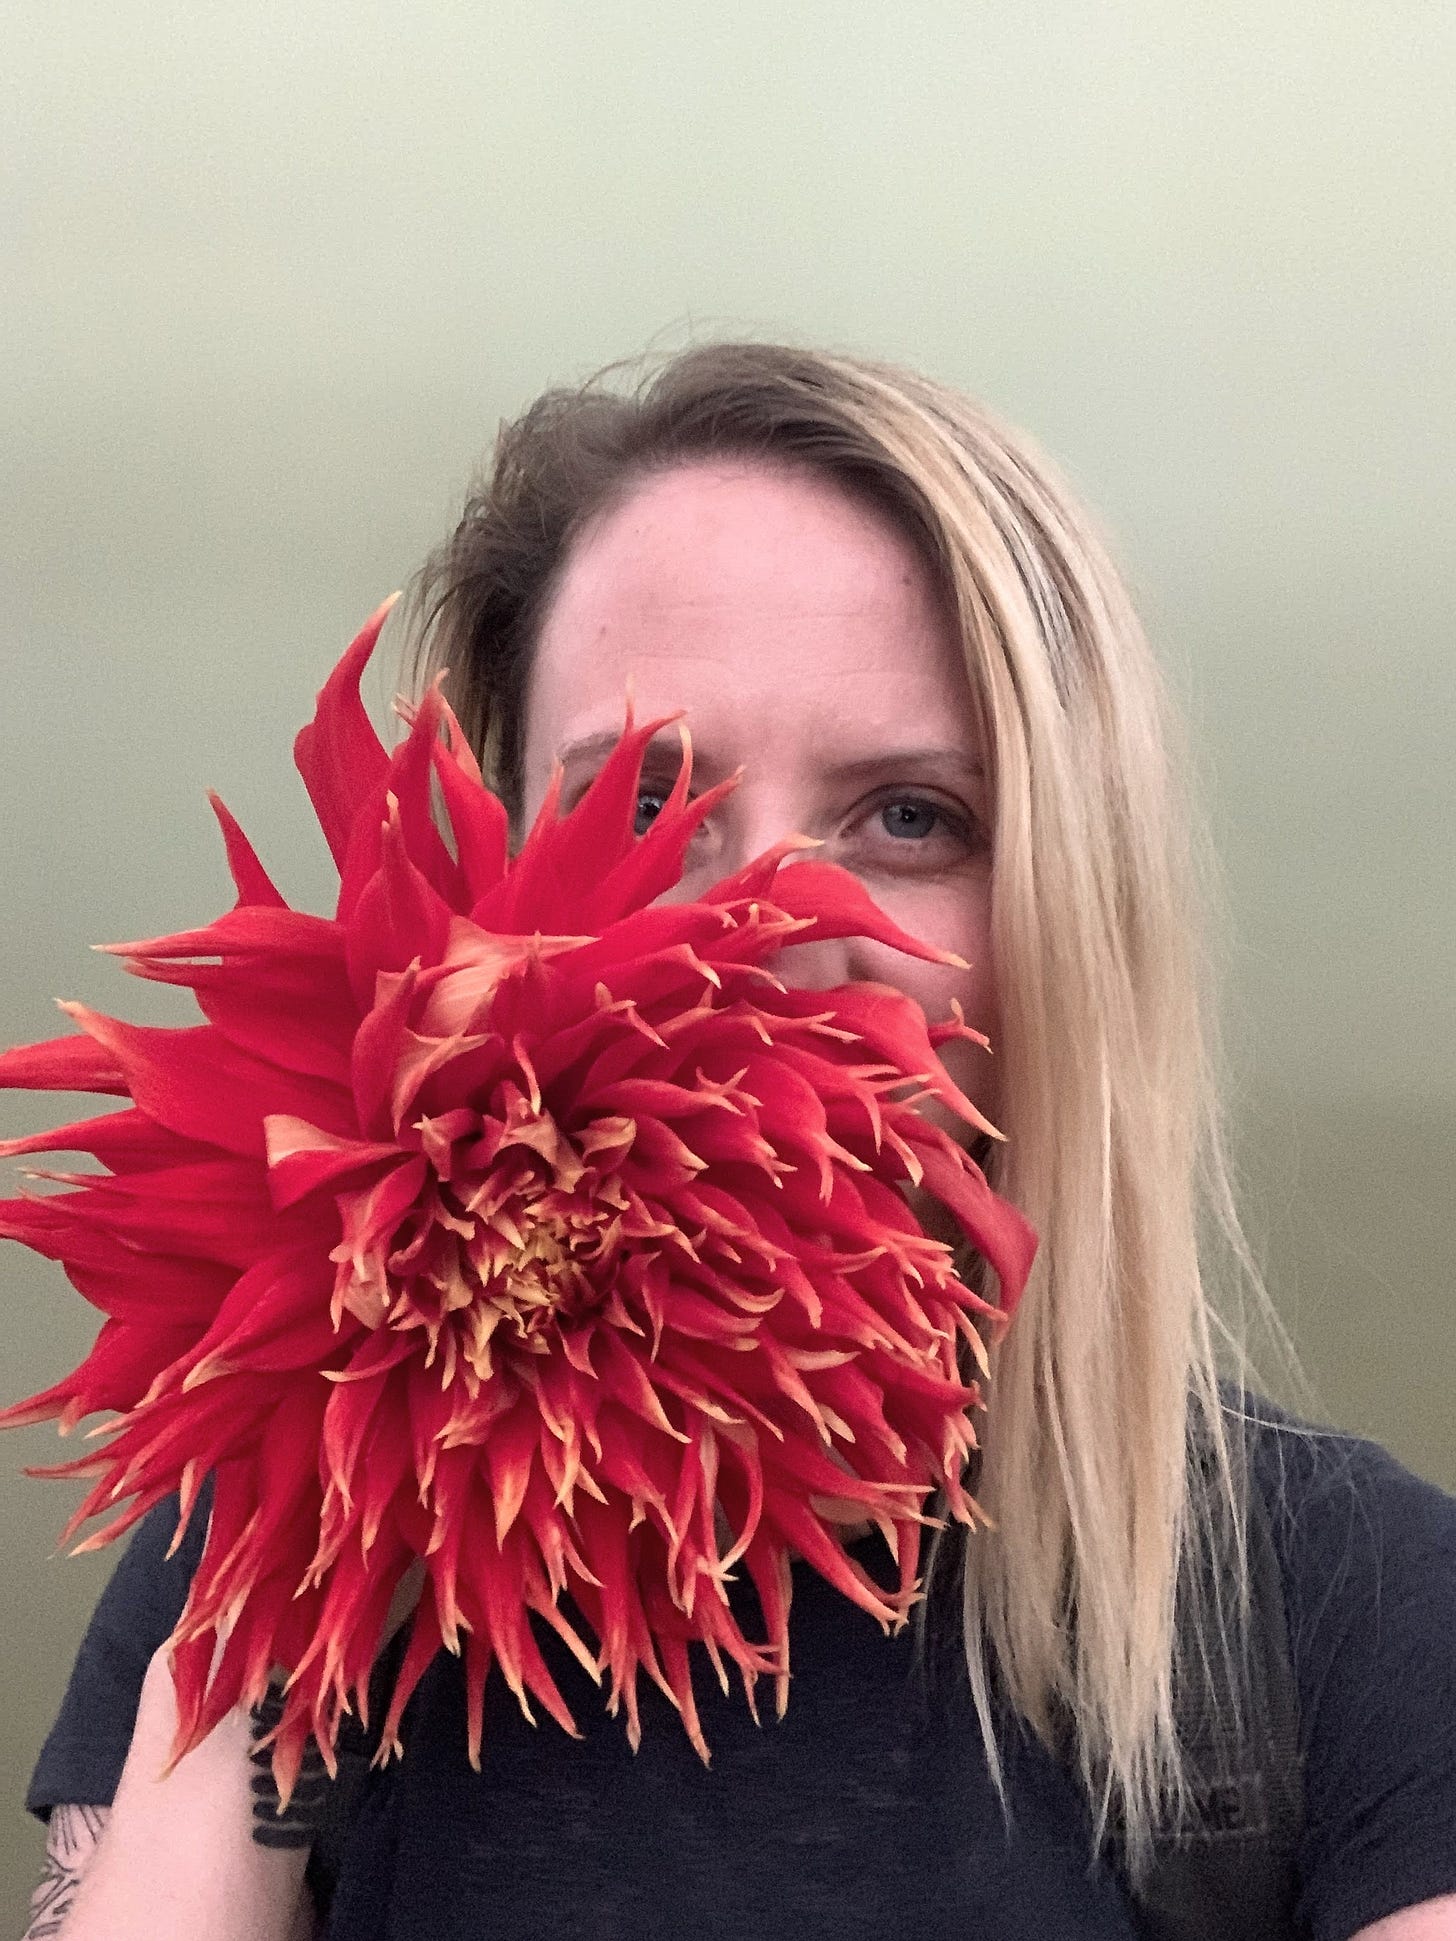 close-up of a woman's face behind a very large red dahlia flower